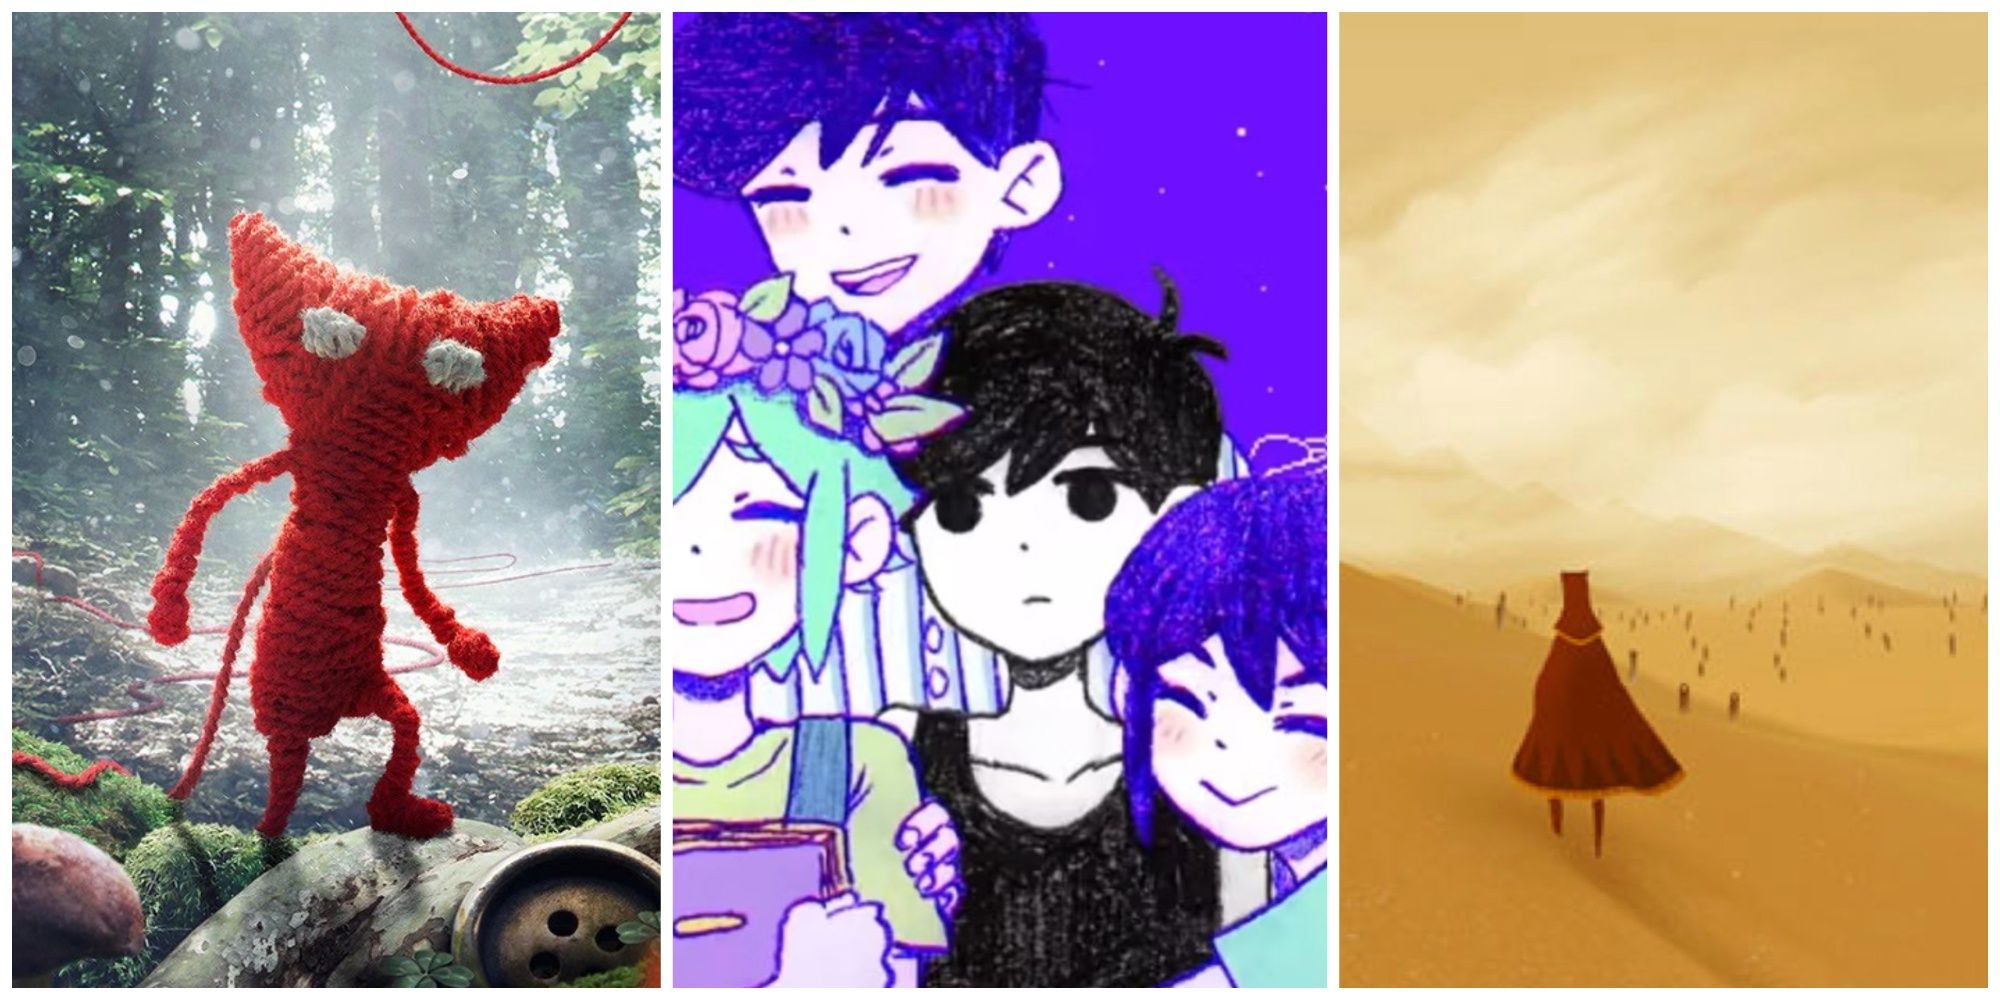 Unravel, Omori, and Journey